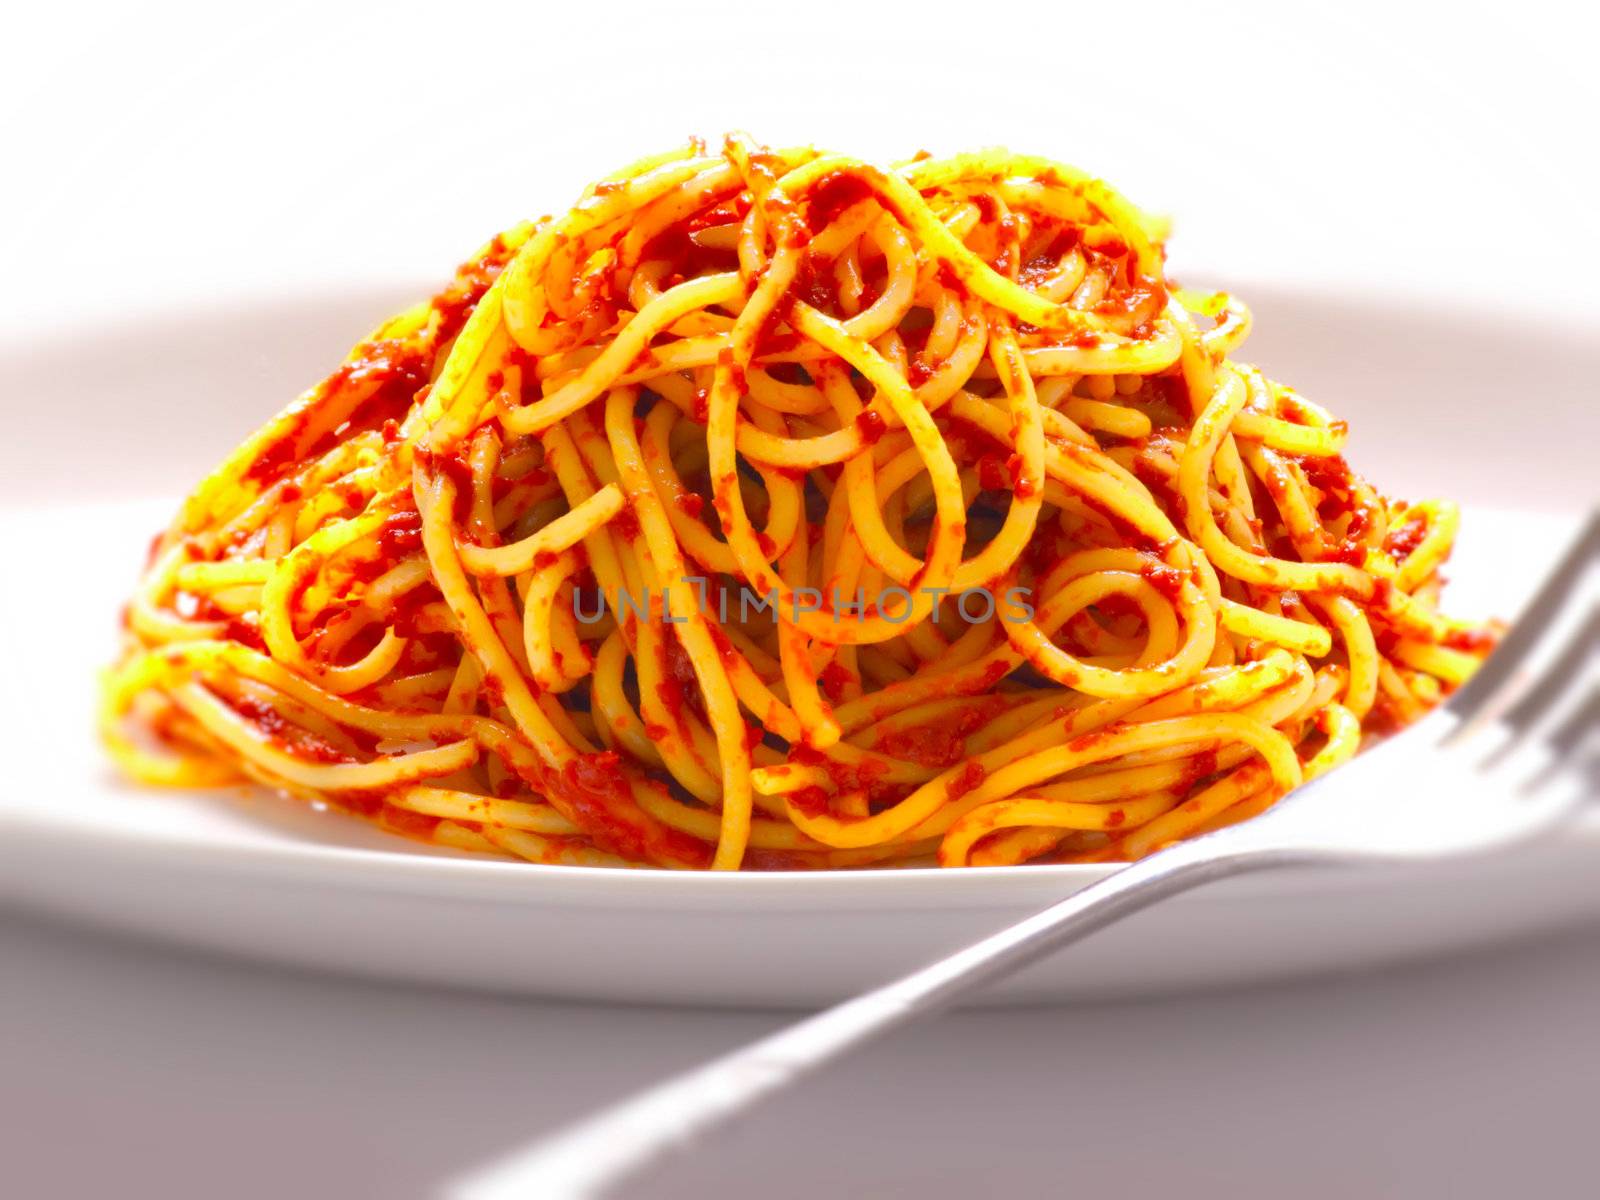 spaghetti noodles in tomato sauce by zkruger